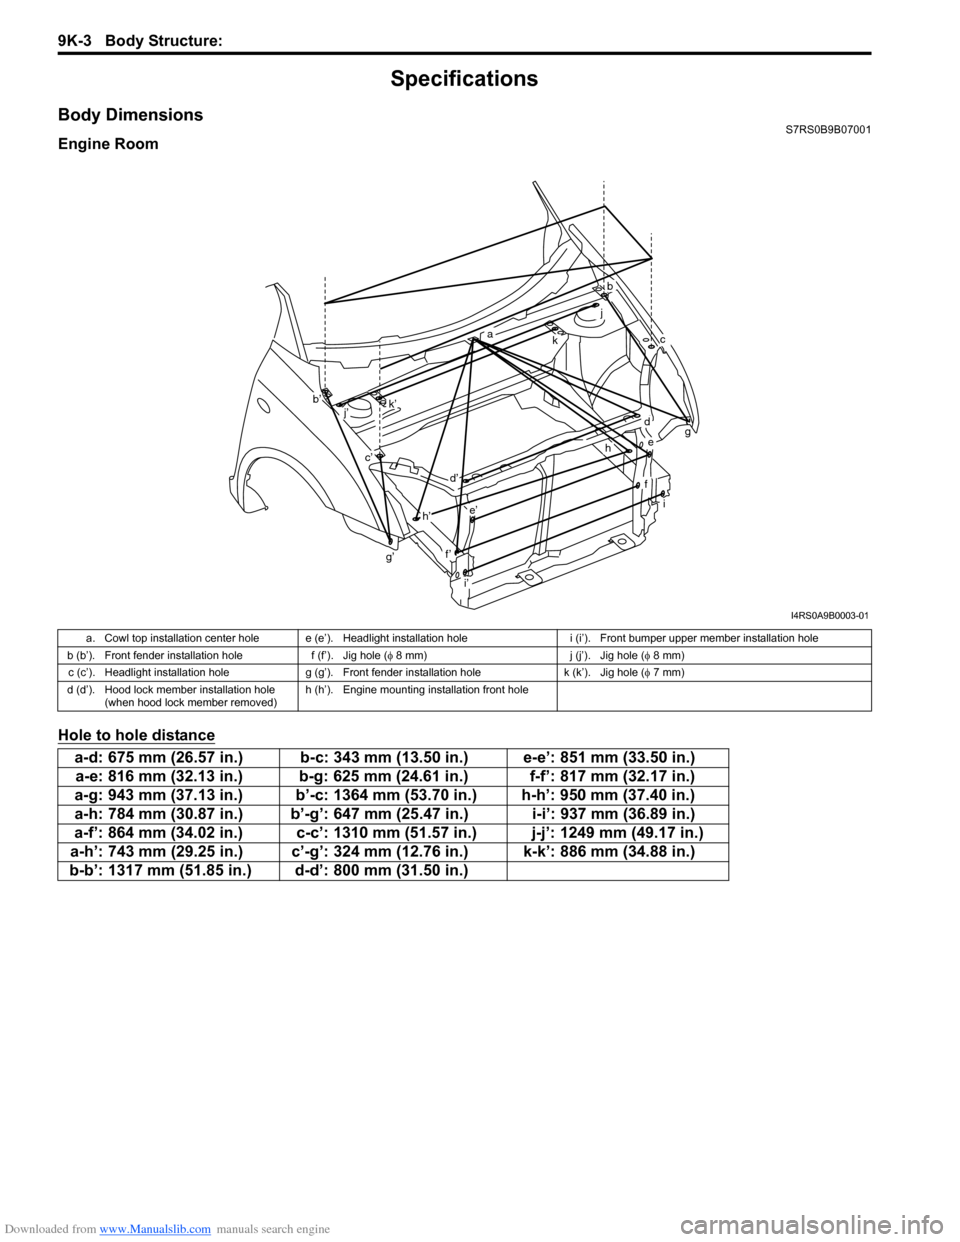 SUZUKI SWIFT 2004 2.G Service Manual PDF Downloaded from www.Manualslib.com manuals search engine 9K-3 Body Structure: 
Specifications
Body DimensionsS7RS0B9B07001
Engine Room
Hole to hole distance
g’
b
ckg
i
a
b’
c’
d
d’
e
e’
f’